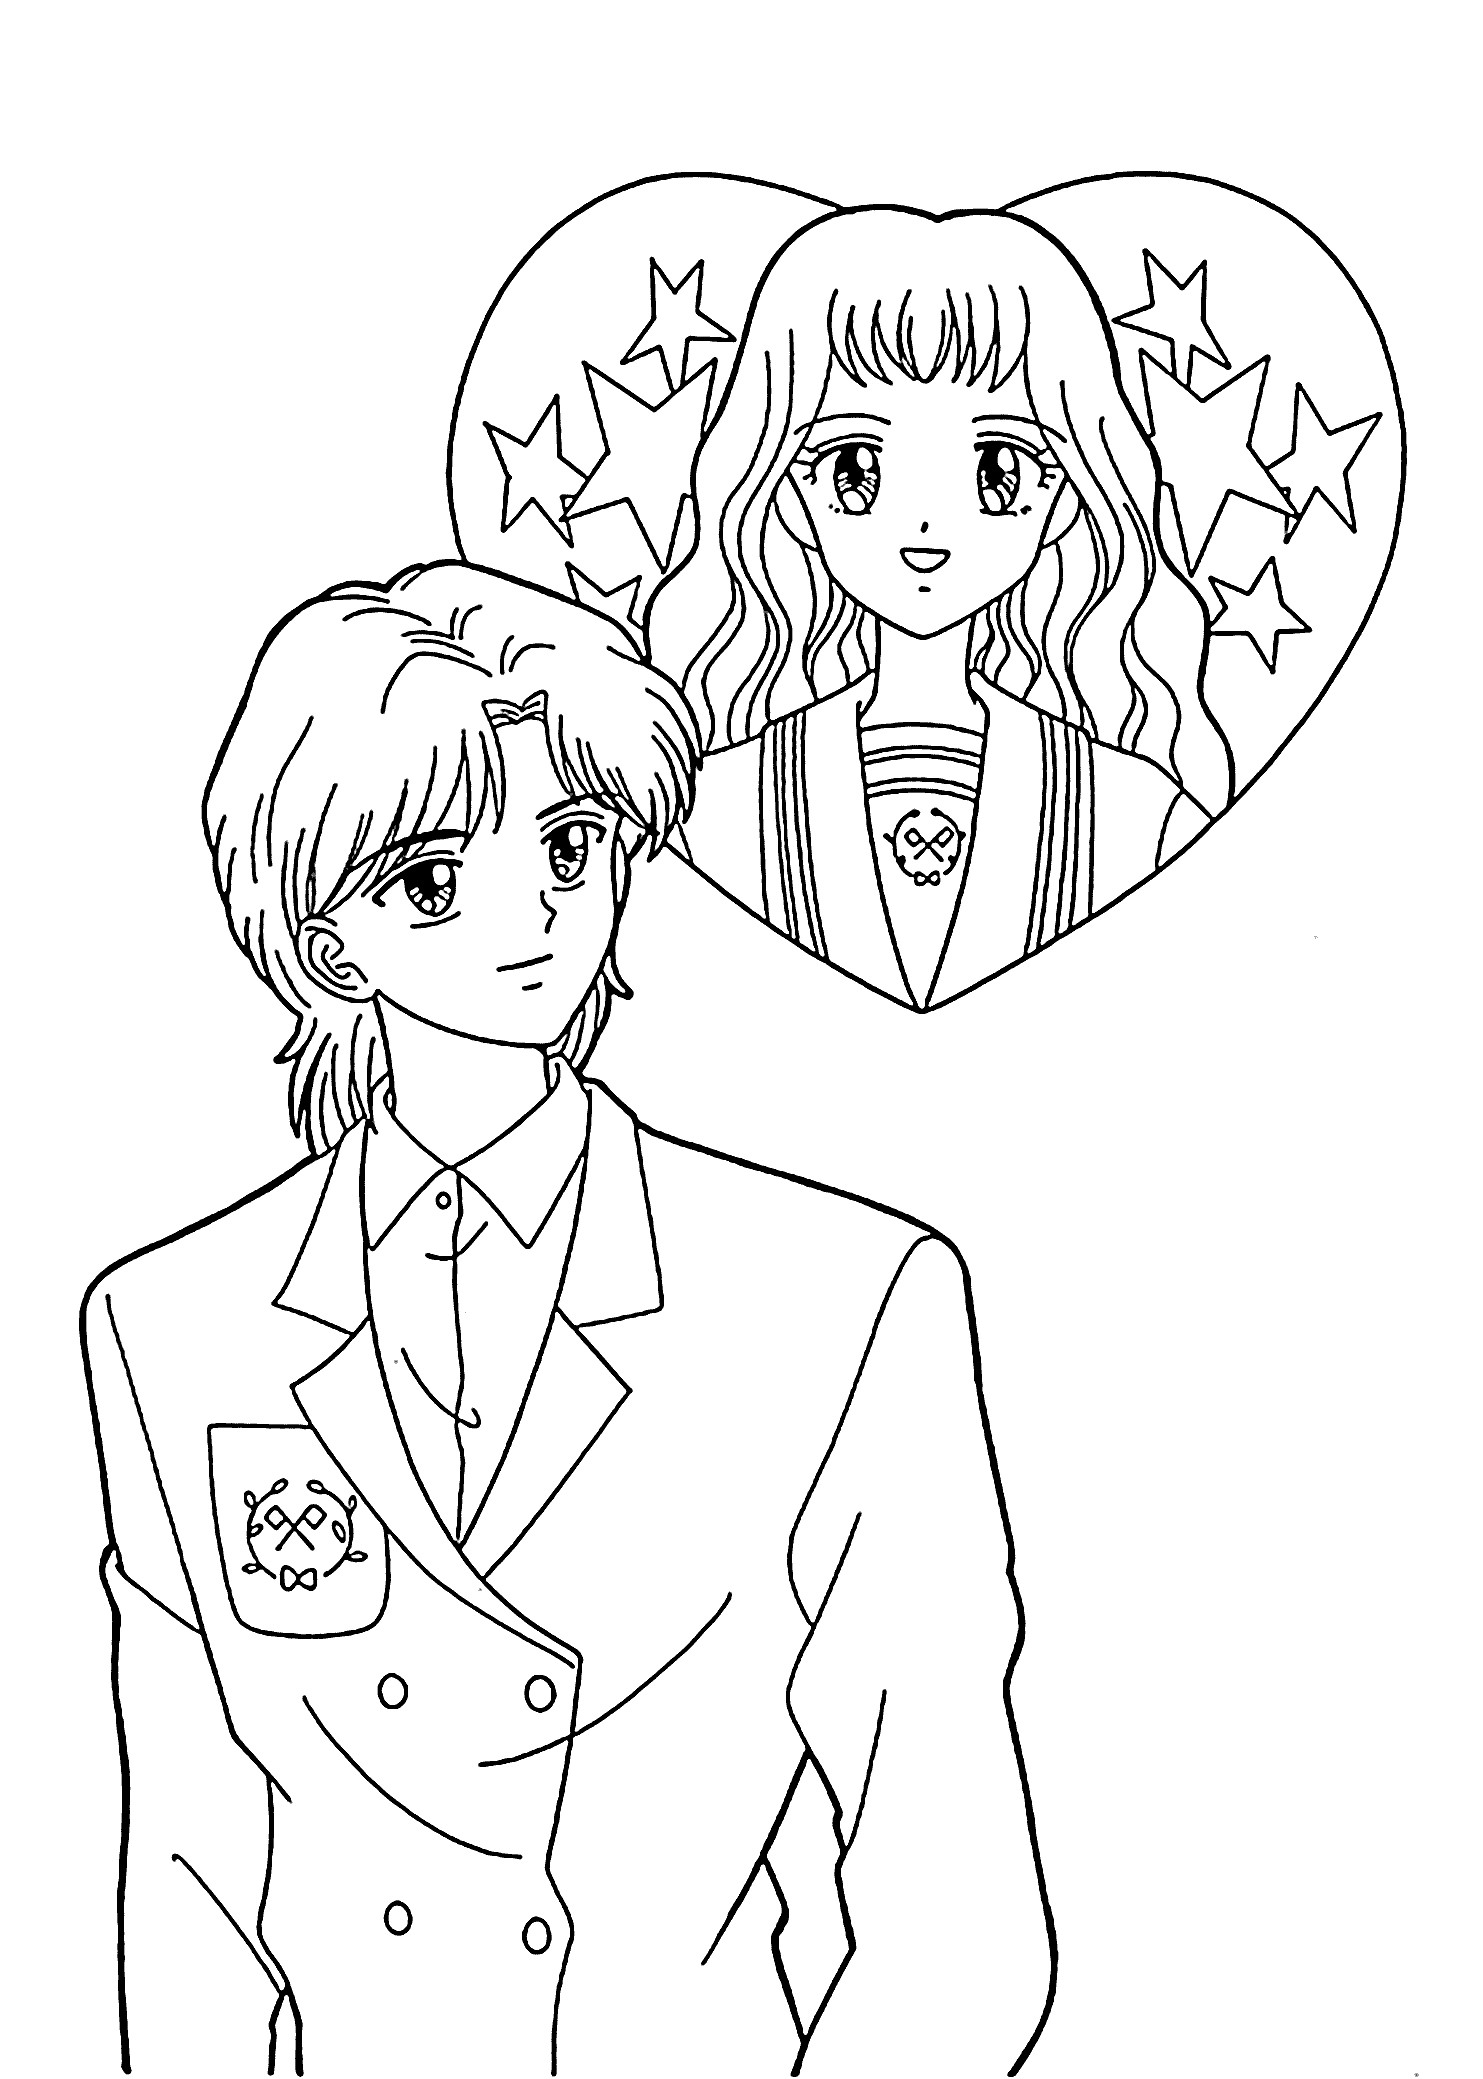 Coloring Pages For Girls And Boys To Print
 Girl And Boy Coloring Page AZ Coloring Pages